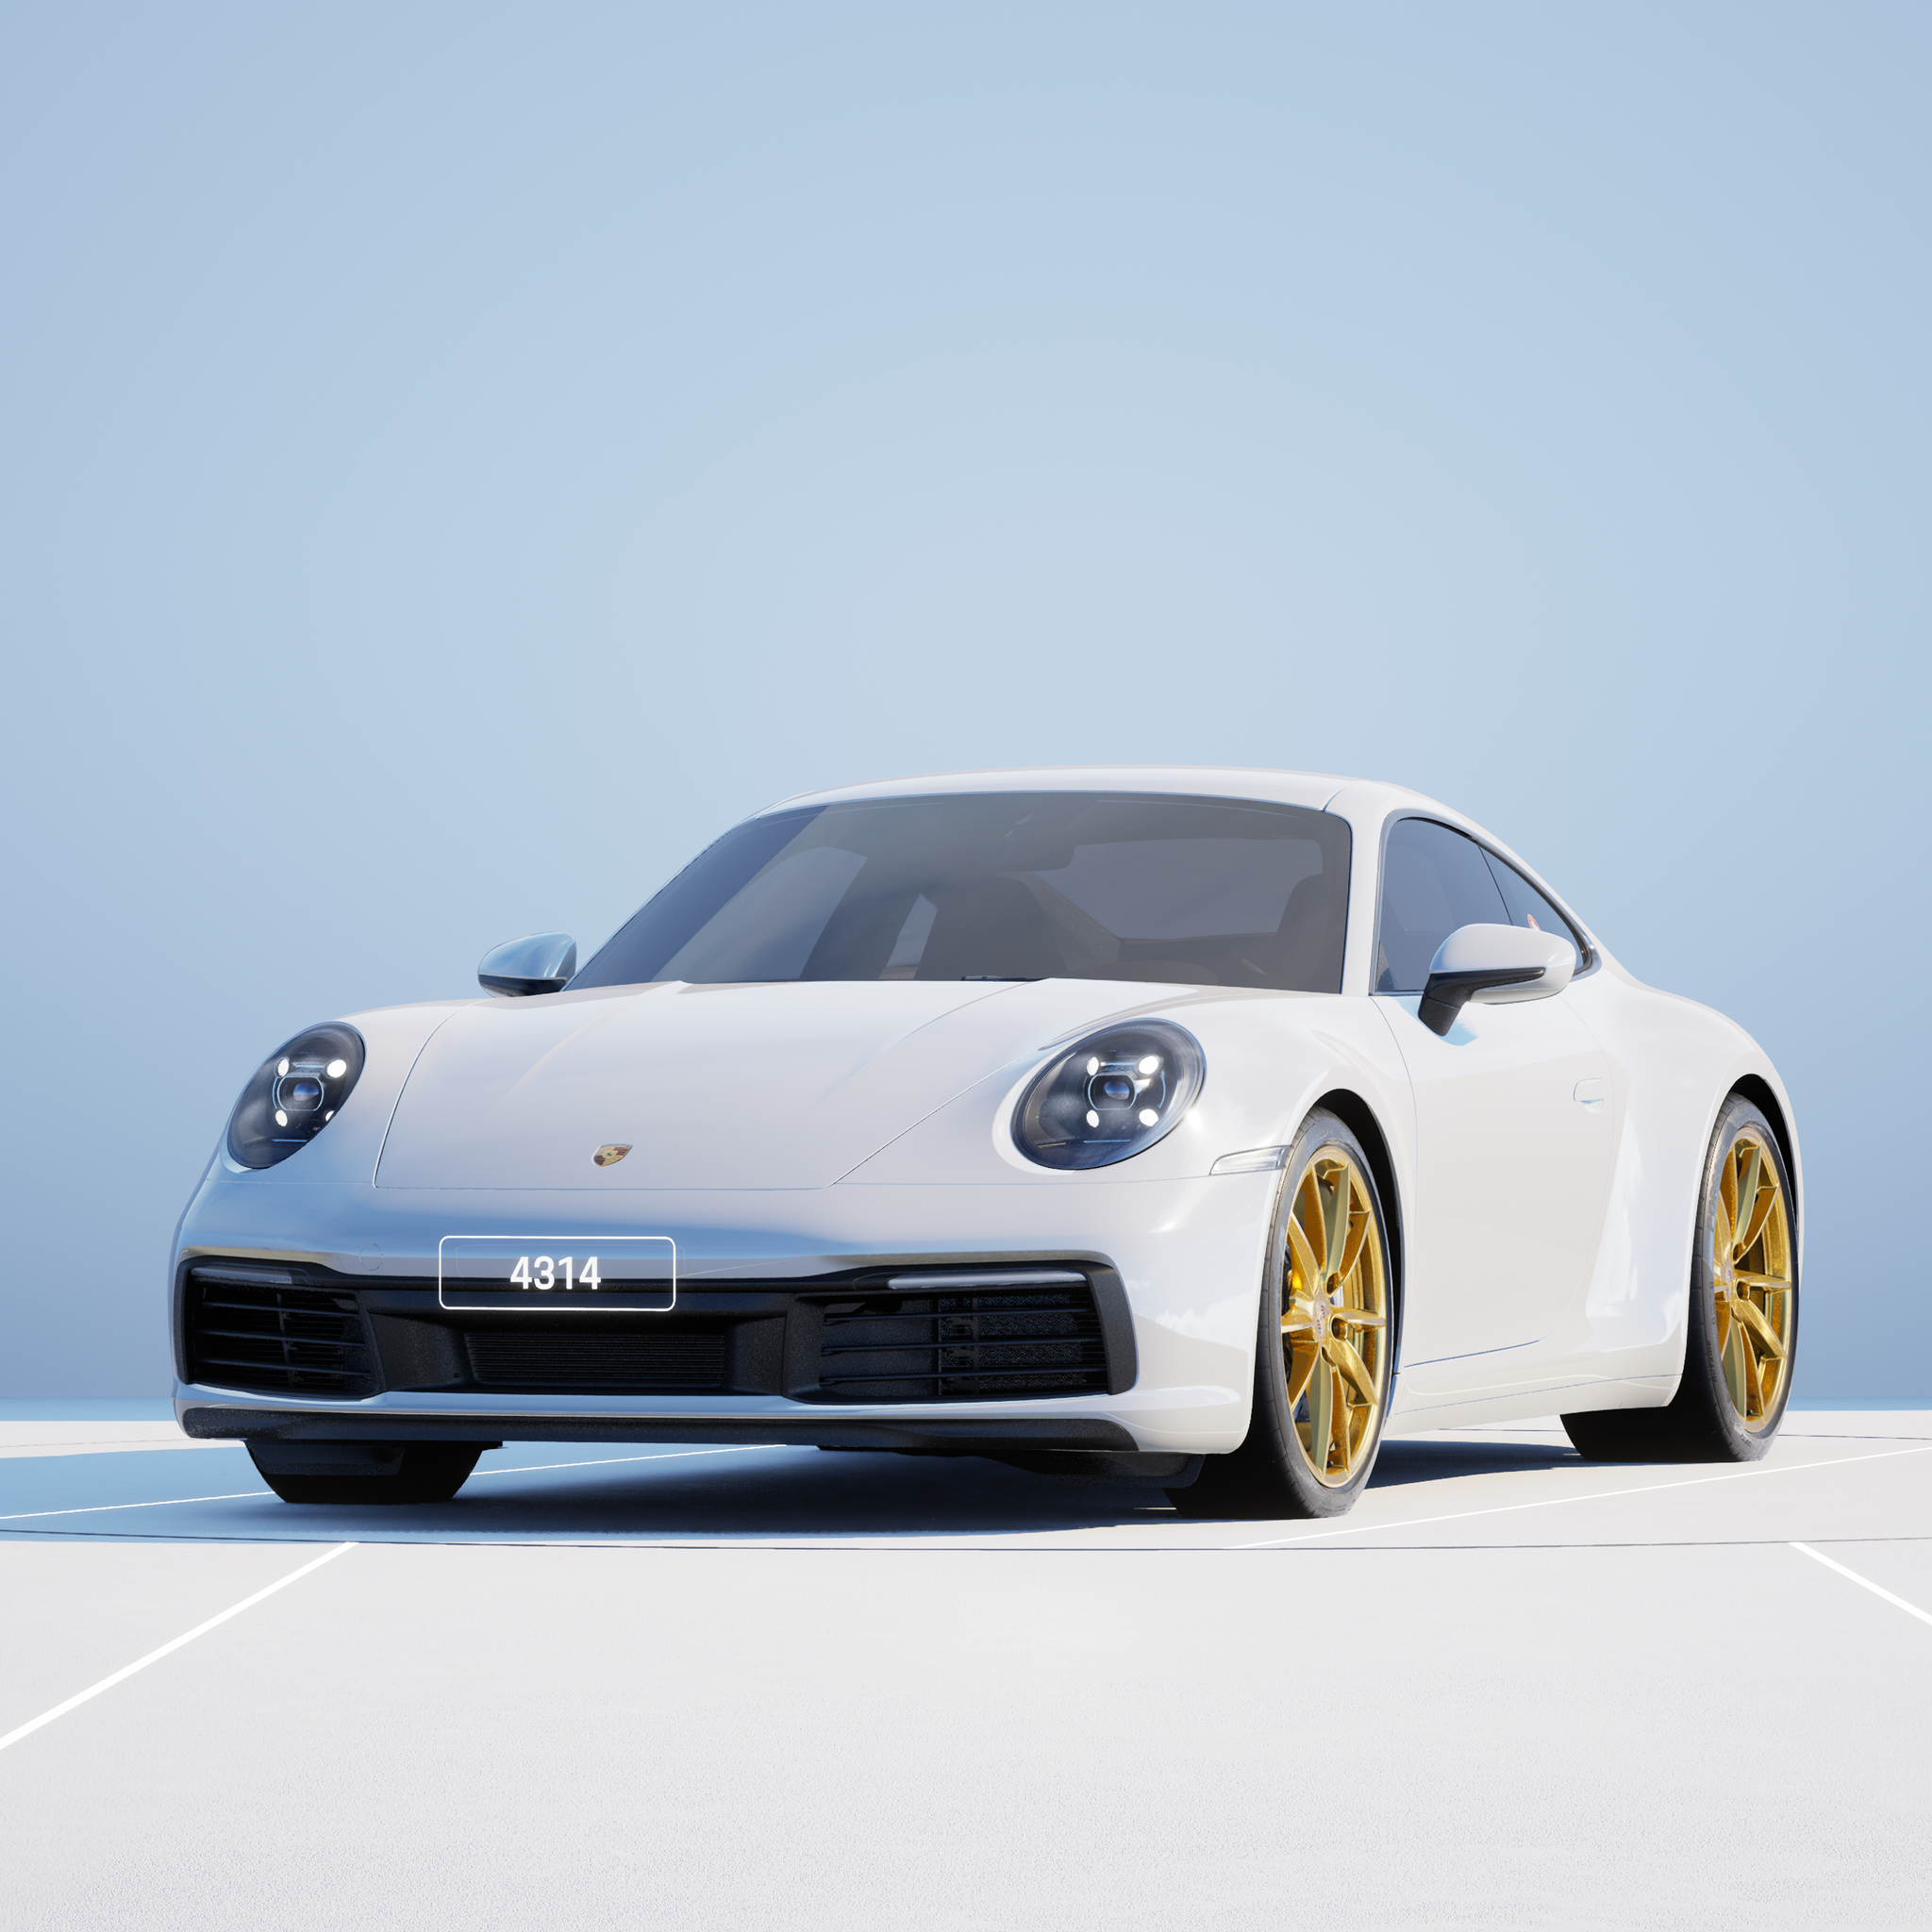 The PORSCHΞ 911 4314 image in phase